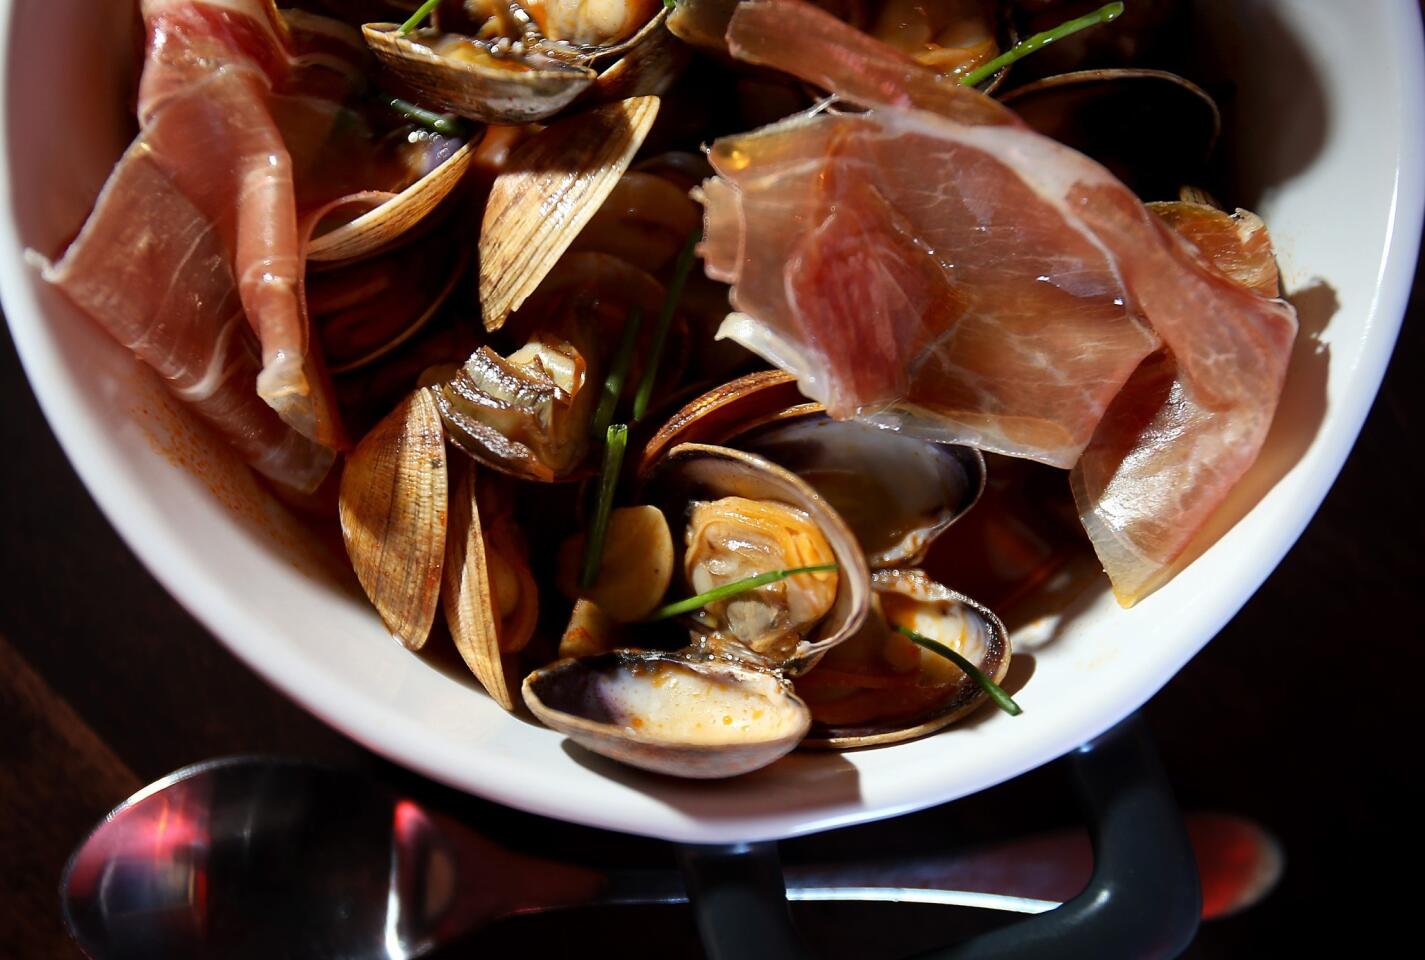 Almejes amb pernil i carxofes, made with Manila clams, serrano ham, artichokes and all i pebre, is one of the dishes at Smoke.Oil.Salt, which serves mainly modernized Catalan dishes.